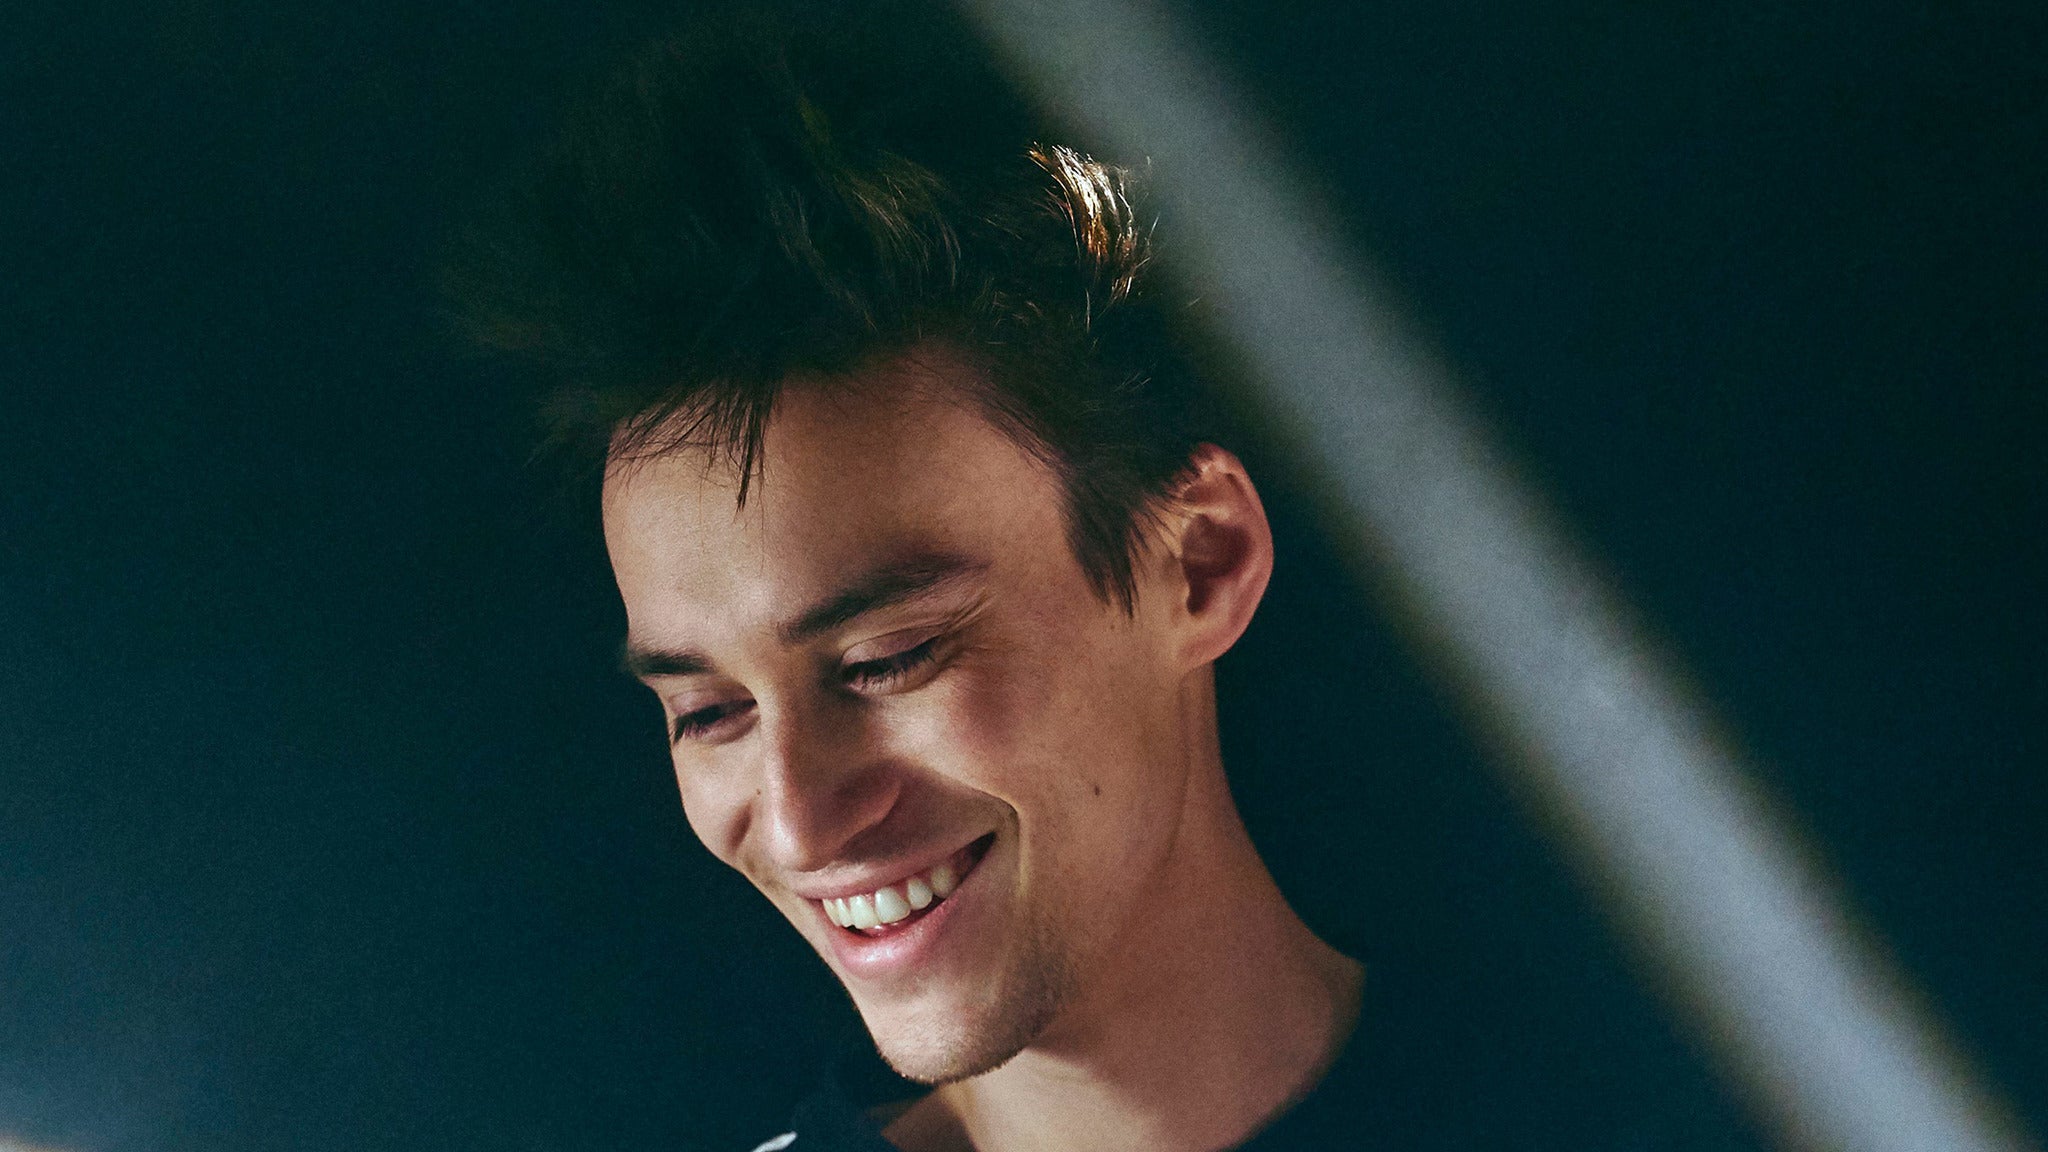 Jacob Collier - DJESSE WORLD TOUR SPRING 2022 - MOVED TO HISTORY in Toronto promo photo for Songkick presale offer code